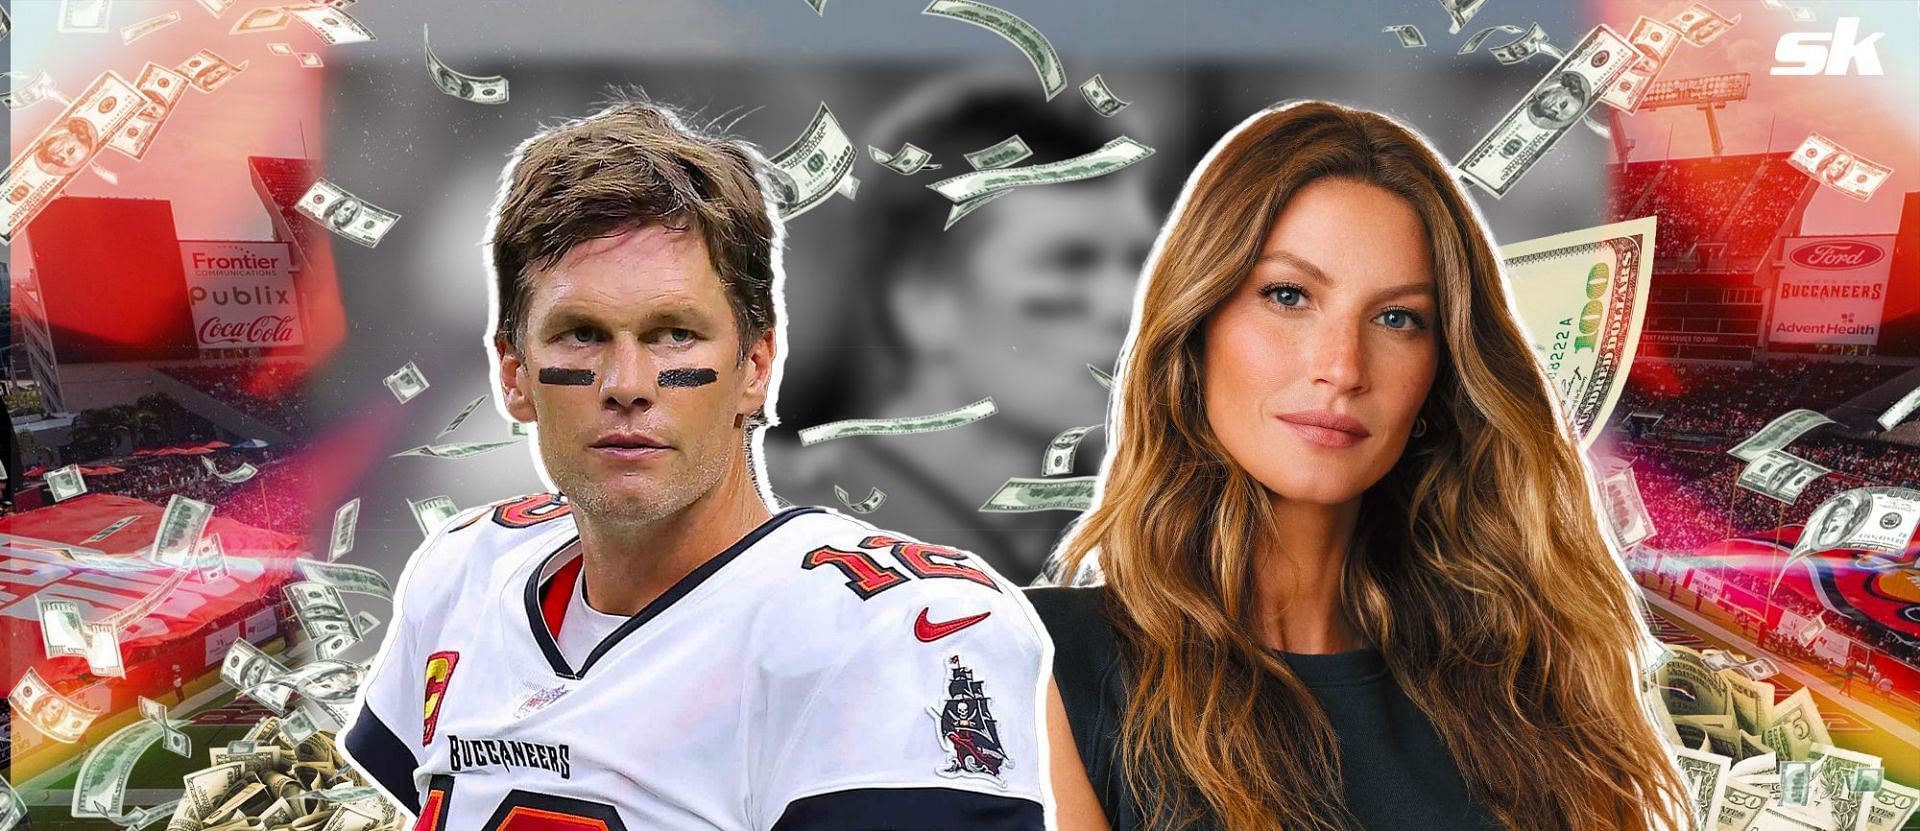  Ex-NBA star points fingers at NFL icon over eventual divorce to $400,000,000 worth Gisele Bundchen